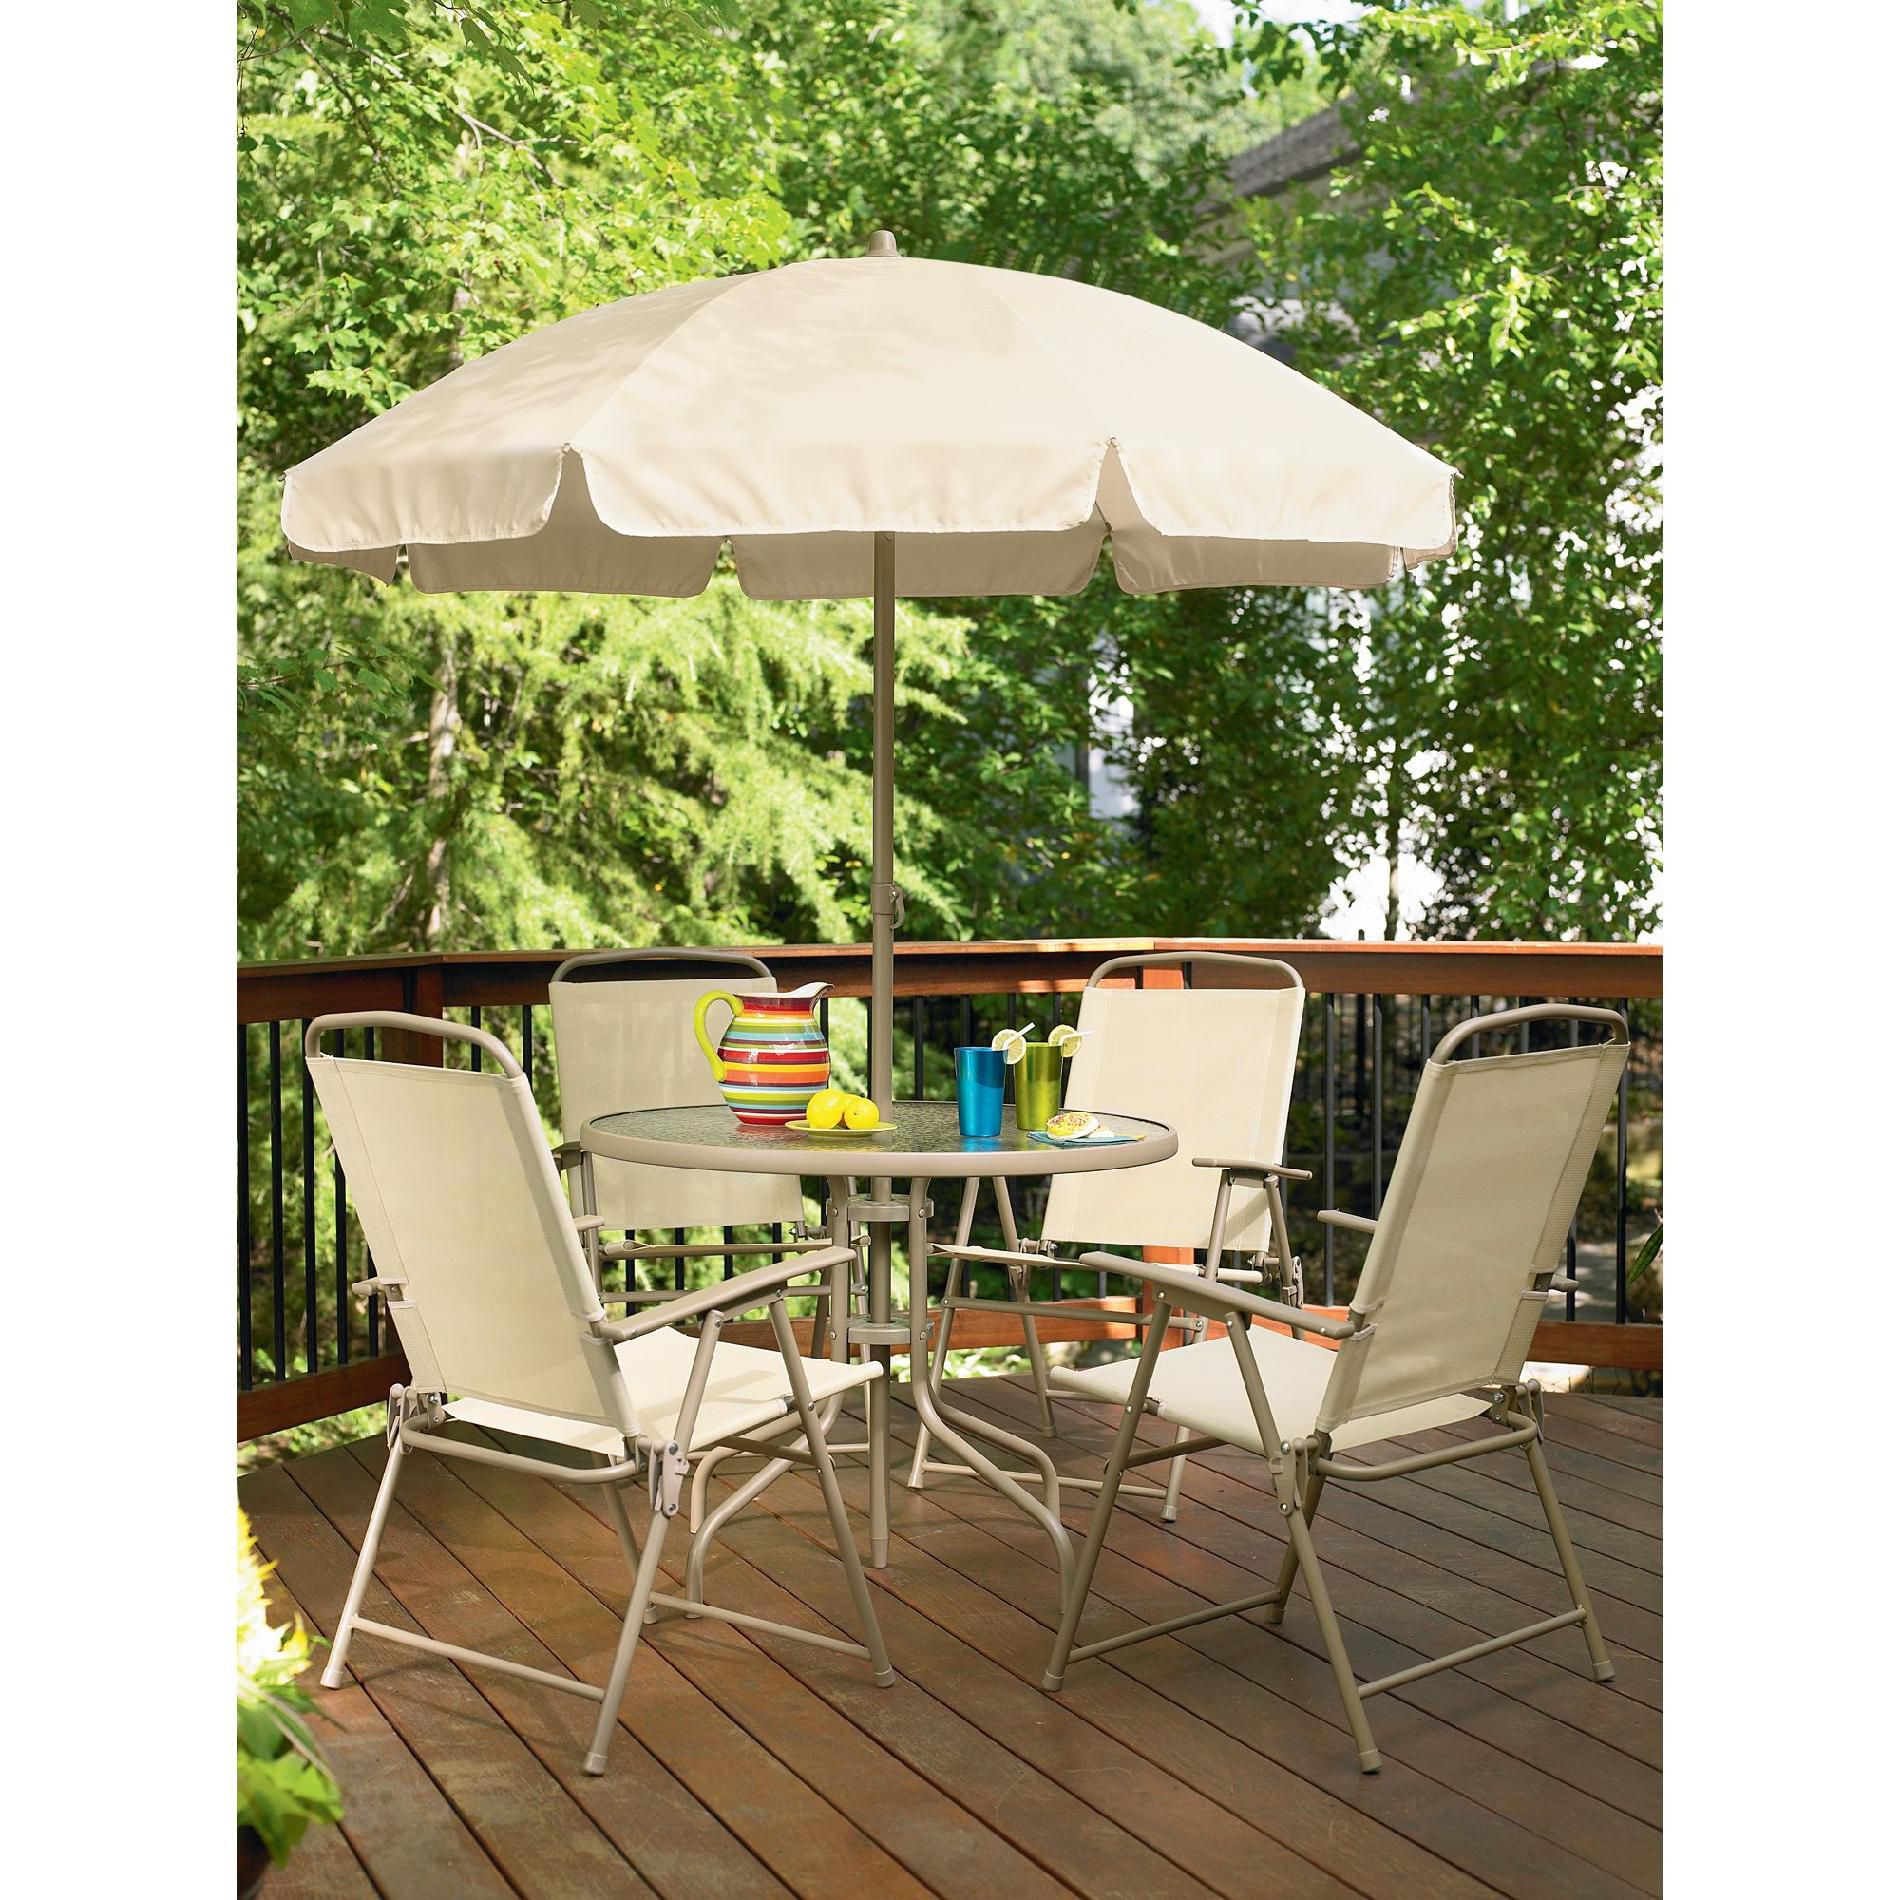 6 Pc. Folding Patio Set on sale 6/15 at kmart - with in-store pickup